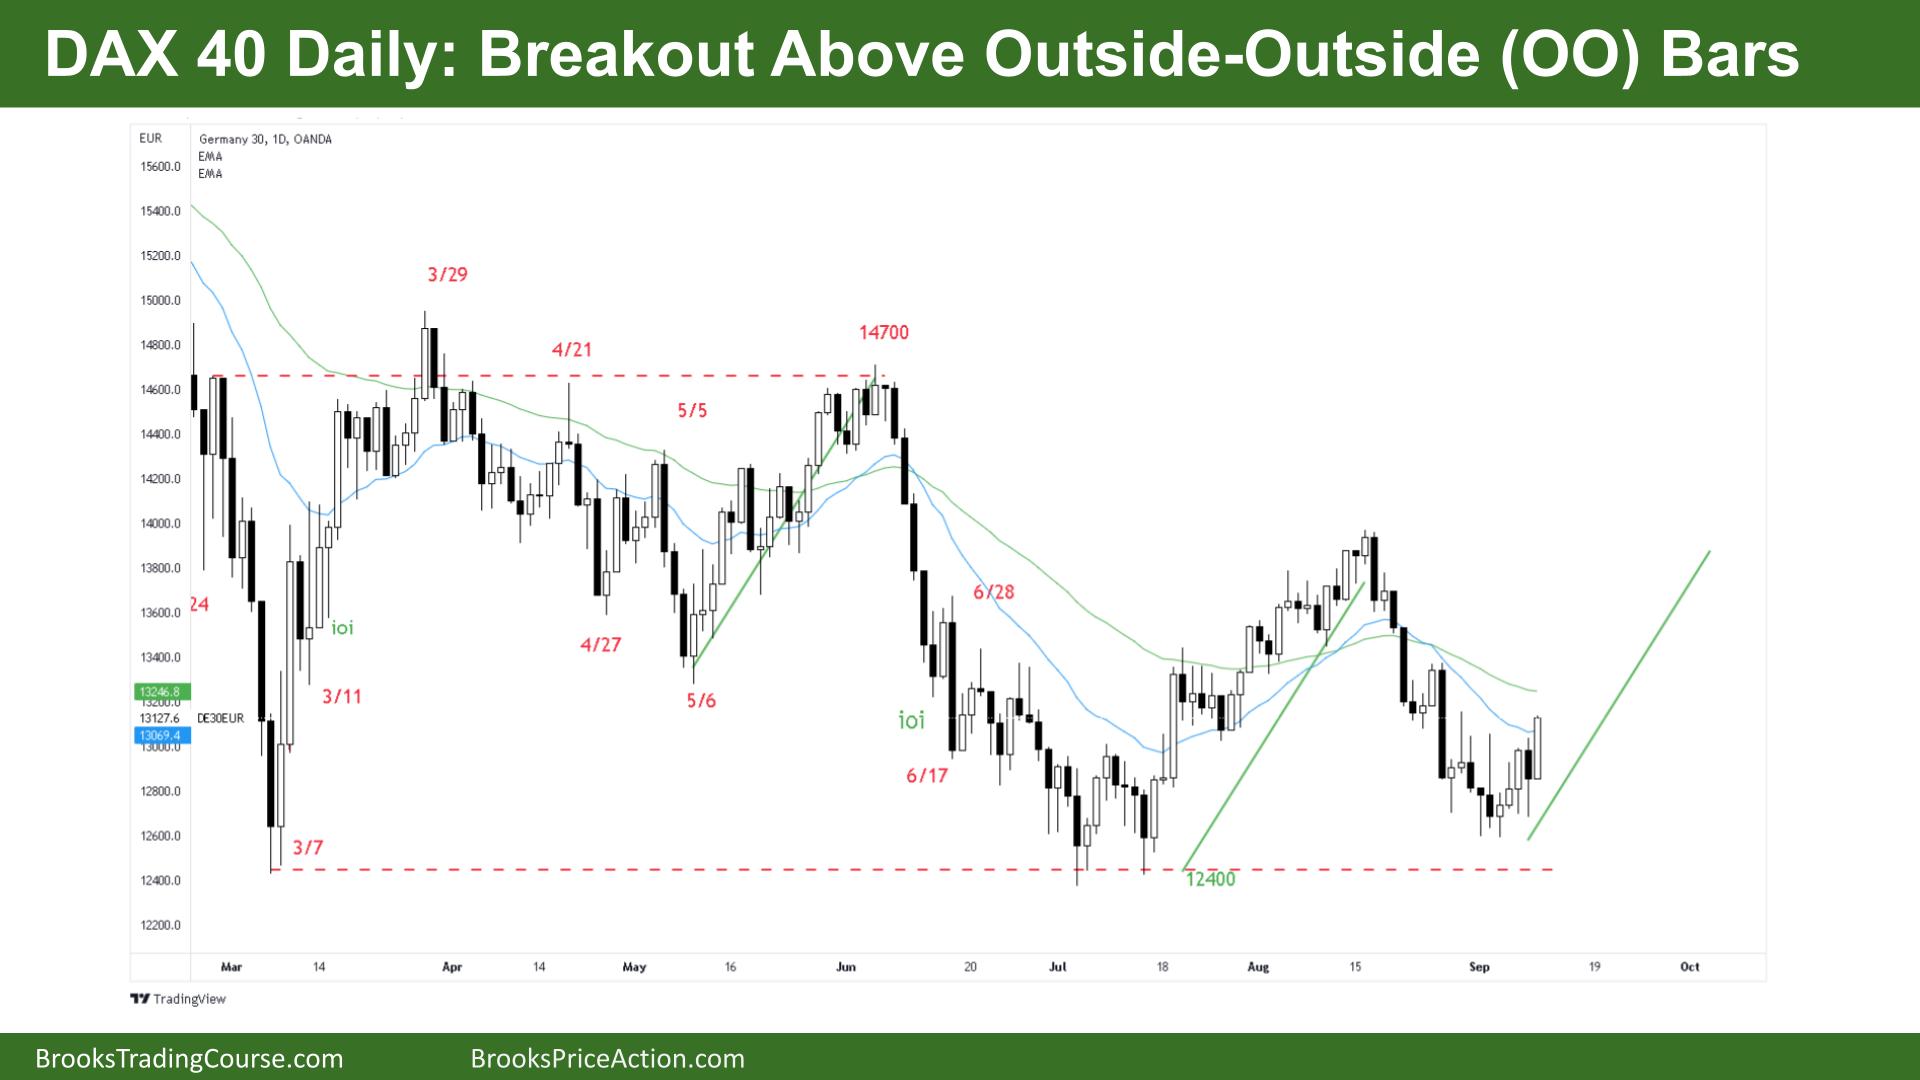 DAX 40 Daily Breakout Above Outside-Outside (OO) Bars